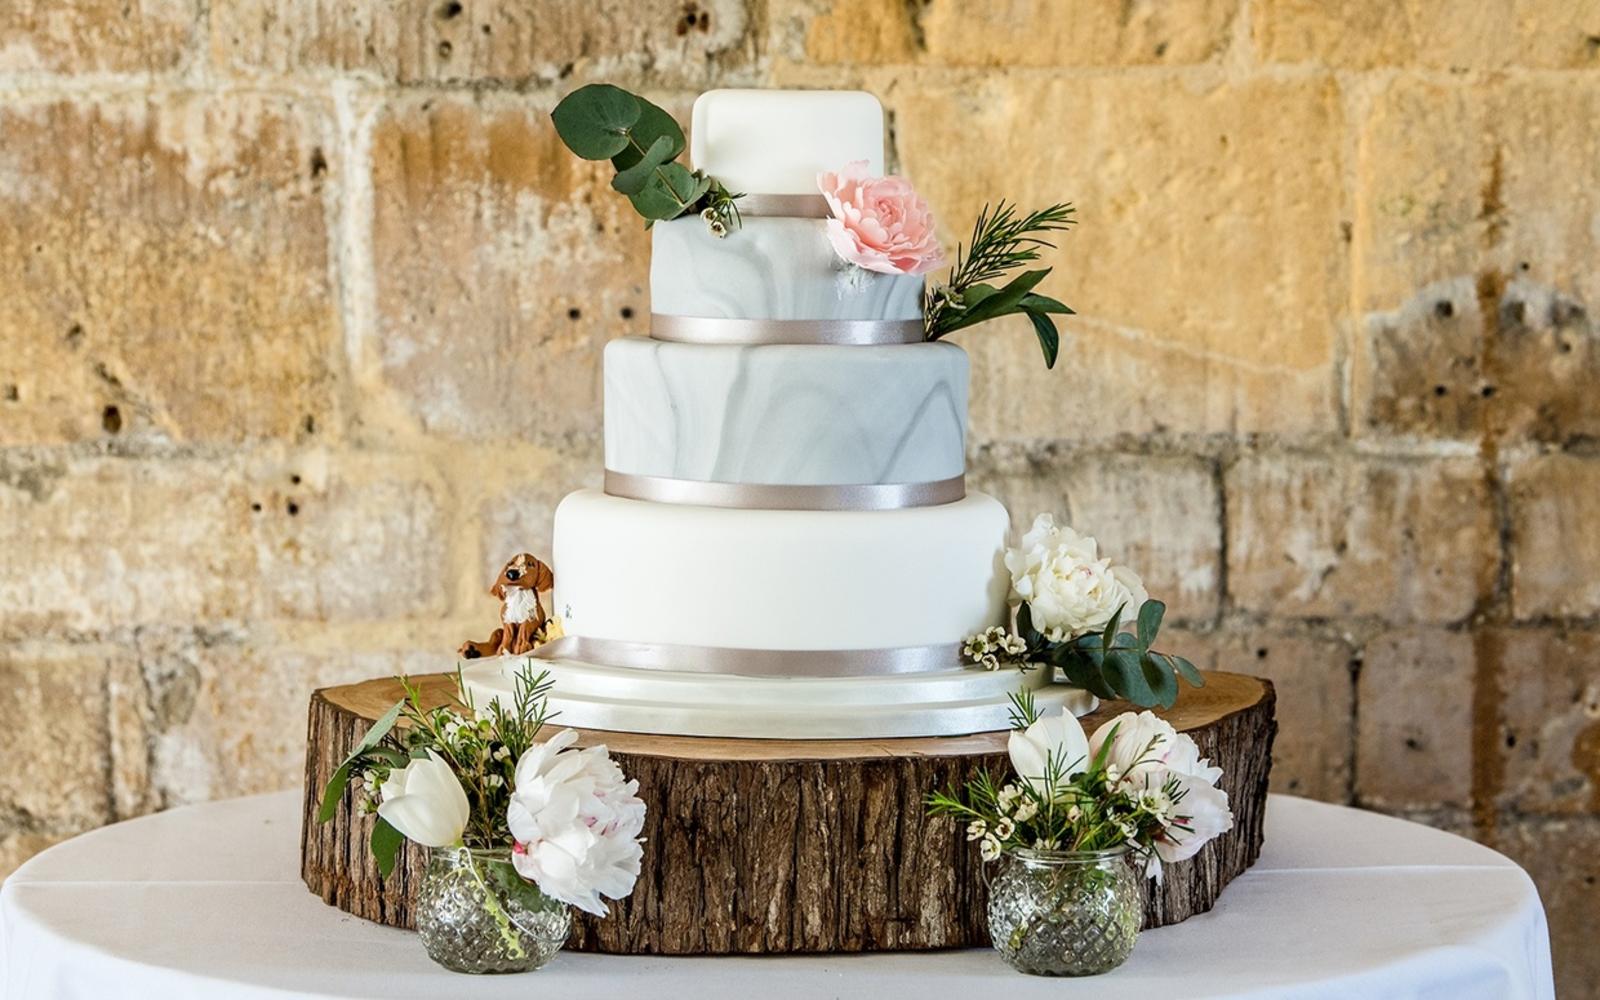 Capture Every Moment wedding photography duo from Cirencester reportage and traditional photographers Lapstone Barn Chipping Campden Cotswolds venue three tiered cake fondant icing champagne ribbon real flowers